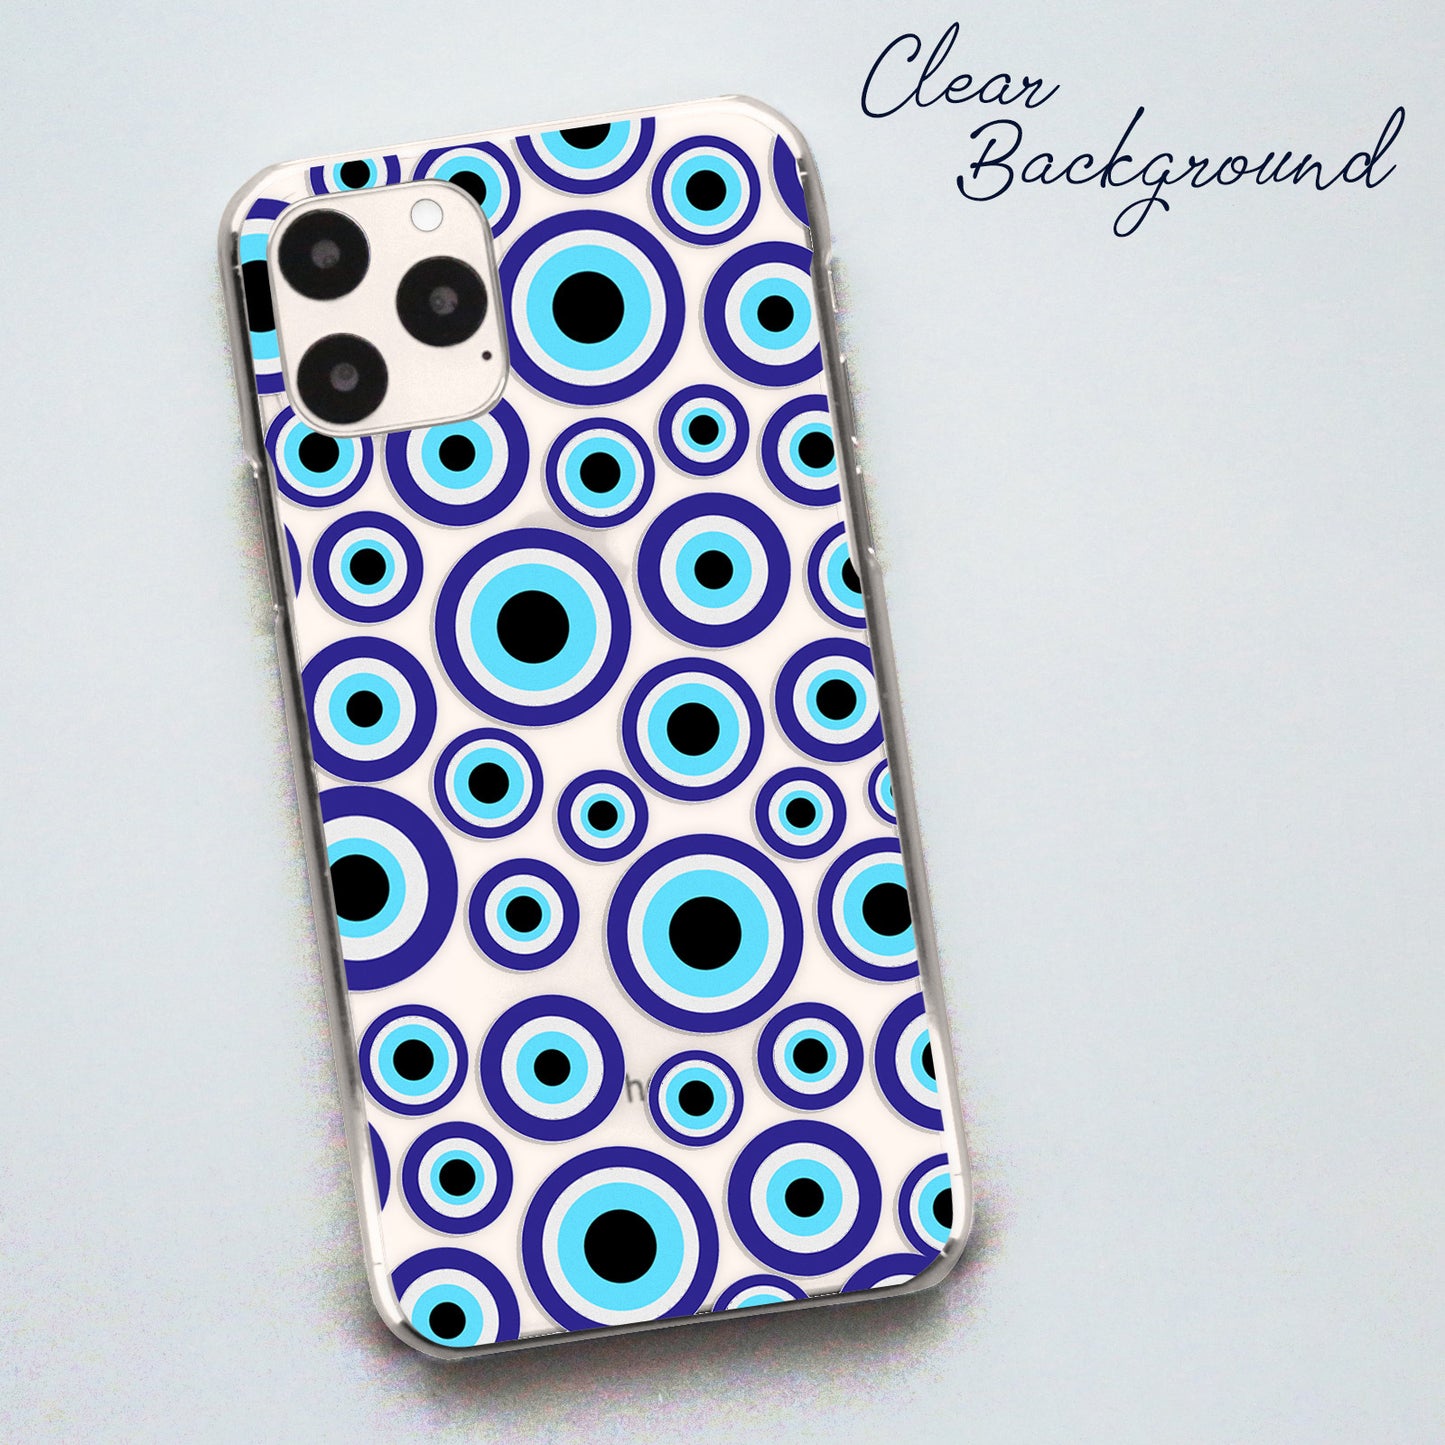 Evil Eyes Phone Case for Apple iPhone - Purple Eyes Stickerbomb